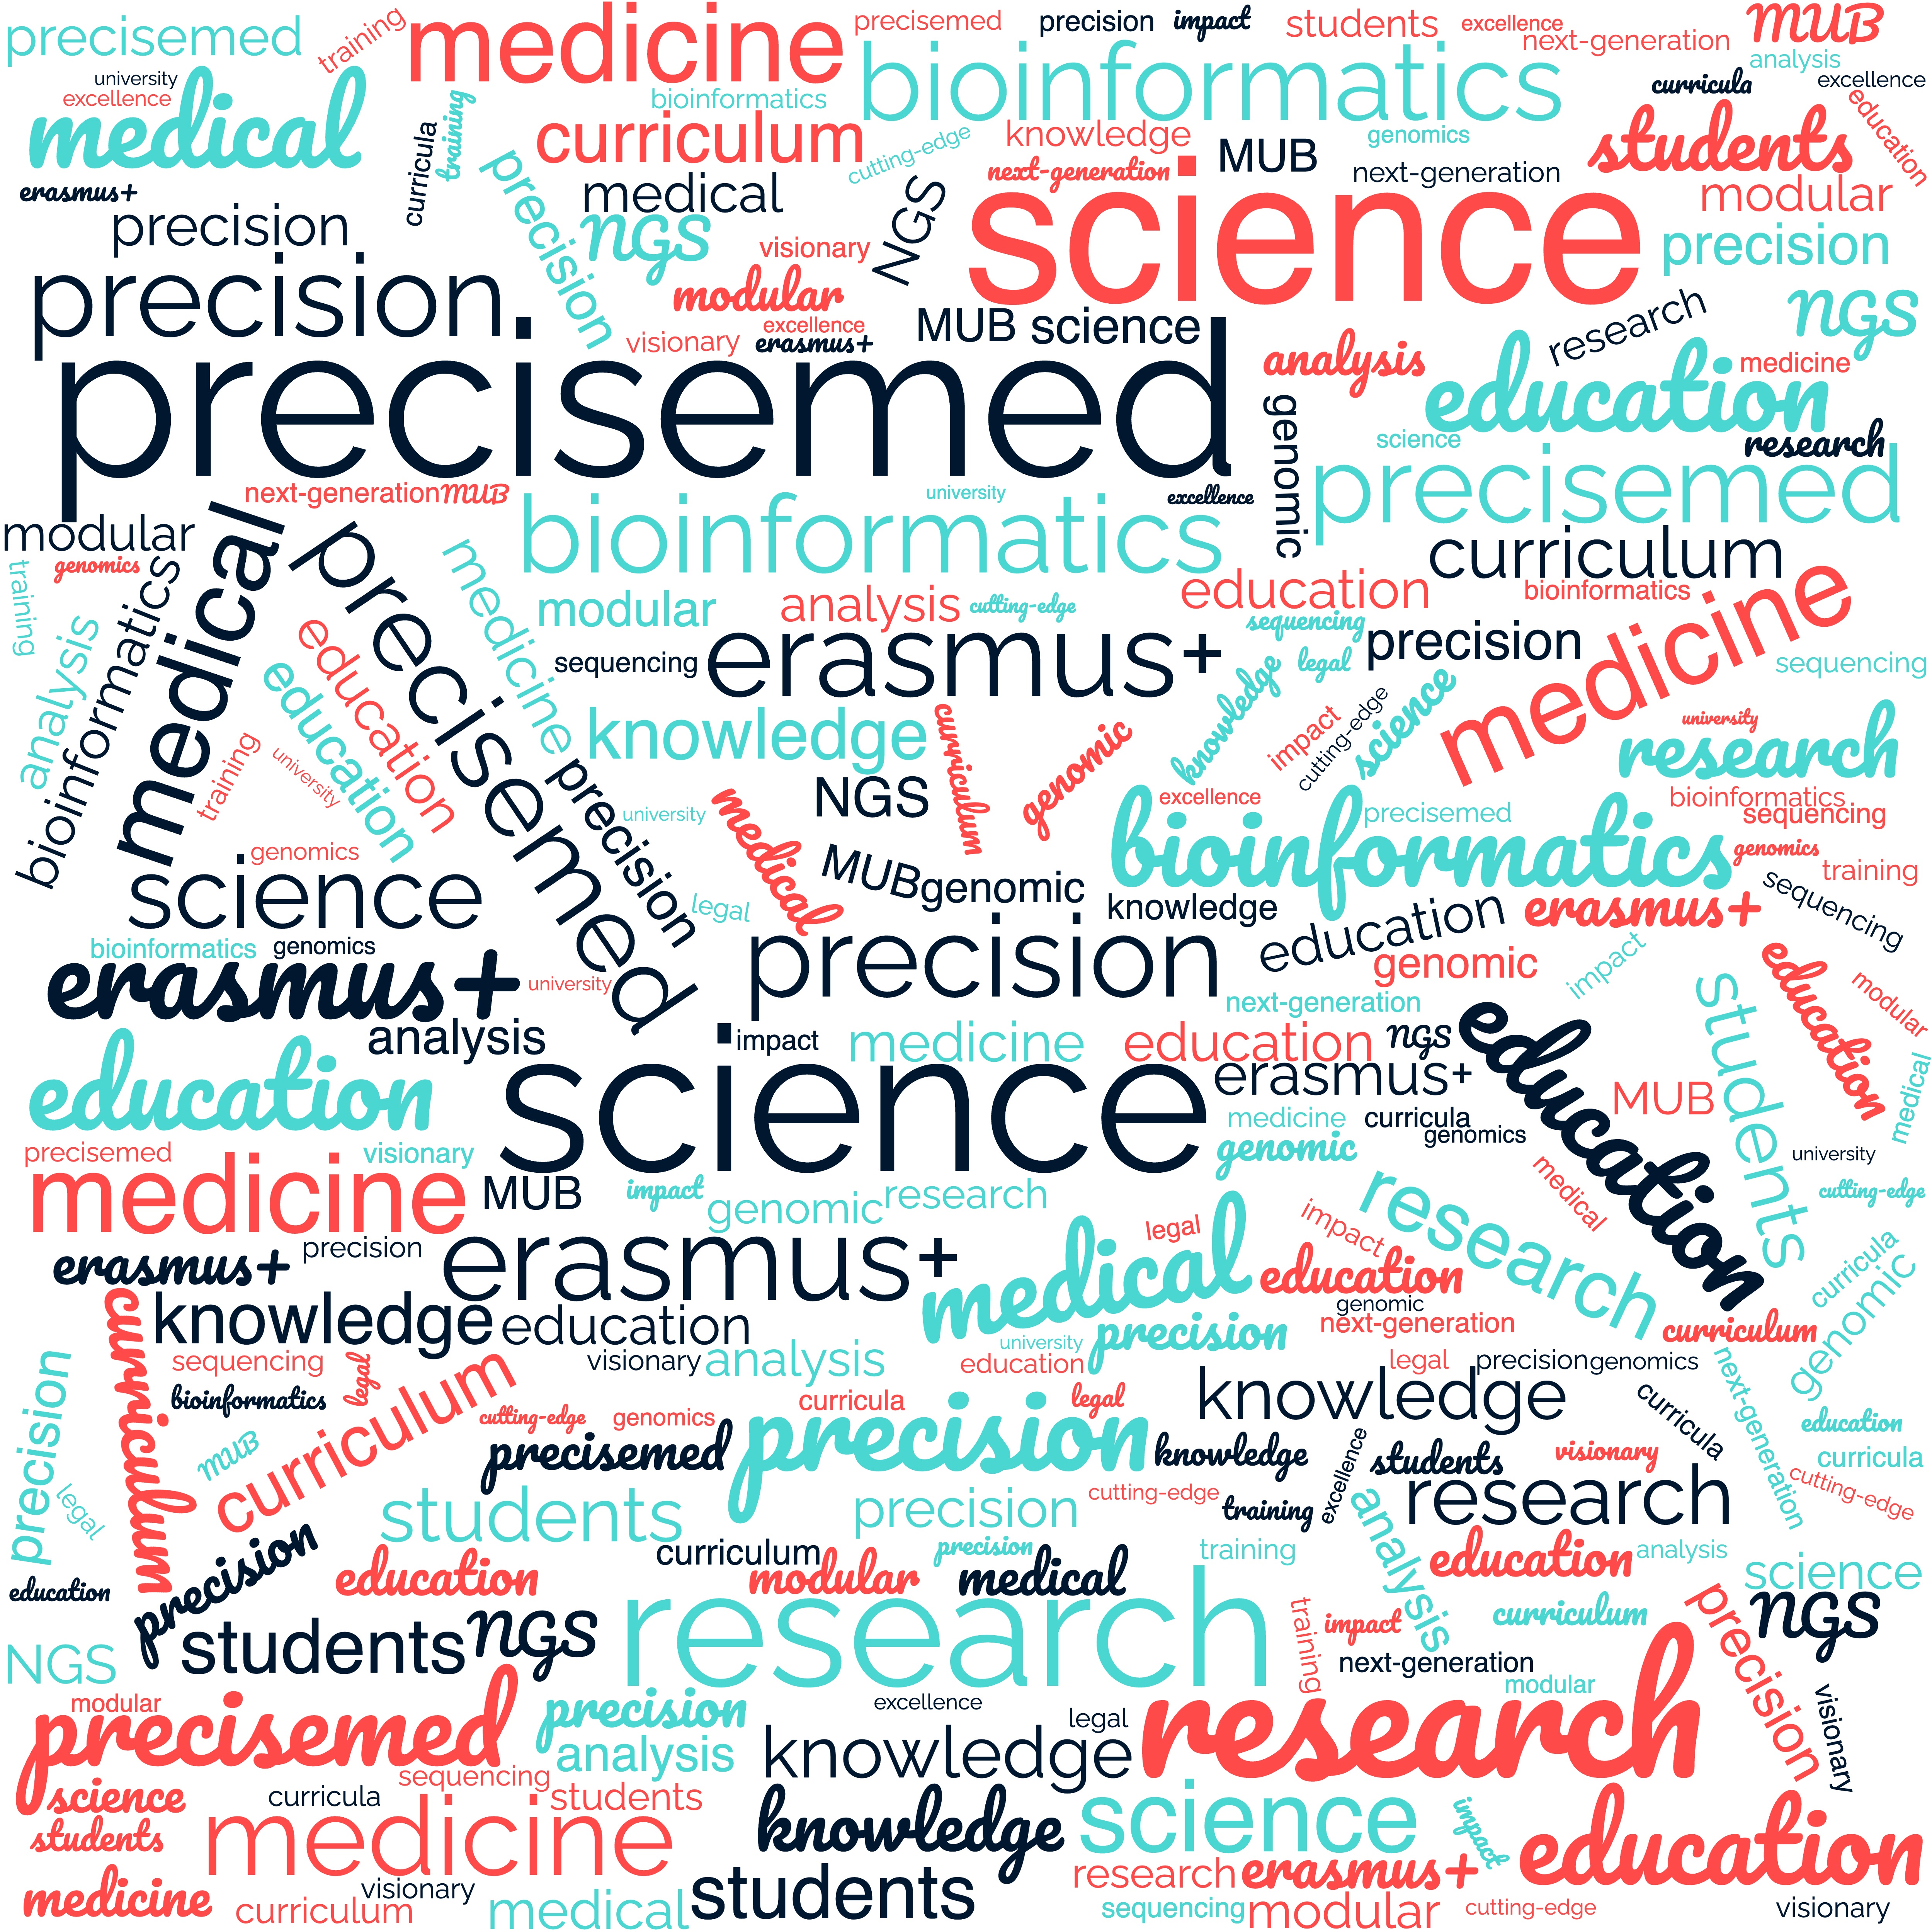 Link: MUB's PRECISEMED Project has received funding from the Erasmus+ to Transform Medical Education